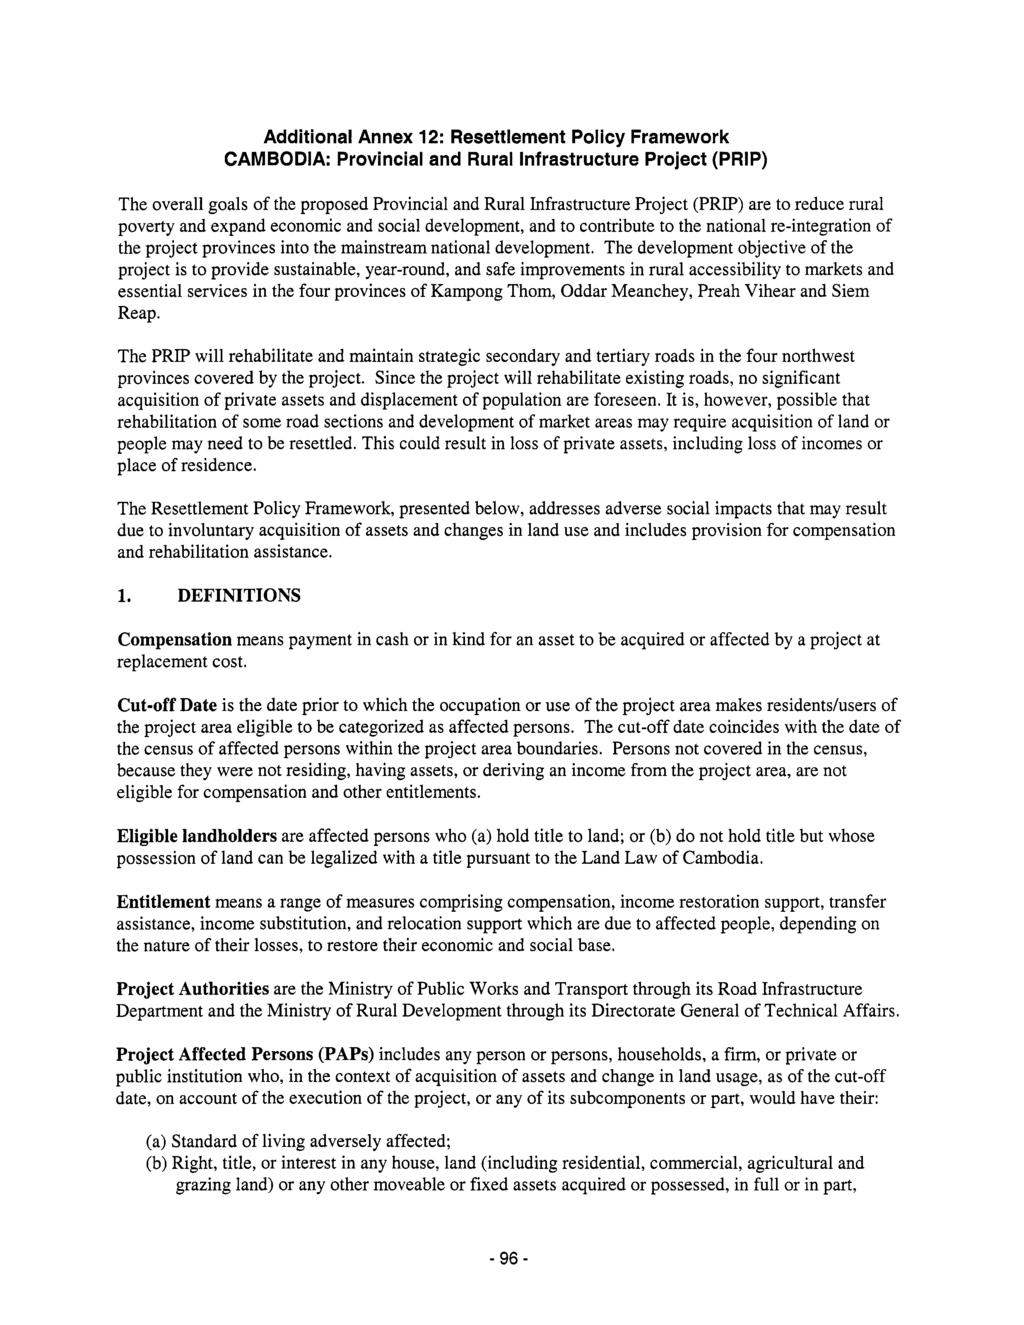 Additional Annex 12: Resettlement Policy Framework CAMBODIA: Provincial and Rural Infrastructure Project (PRIP) The overall goals of the proposed Provincial and Rural Infrastructure Project (PRIP)